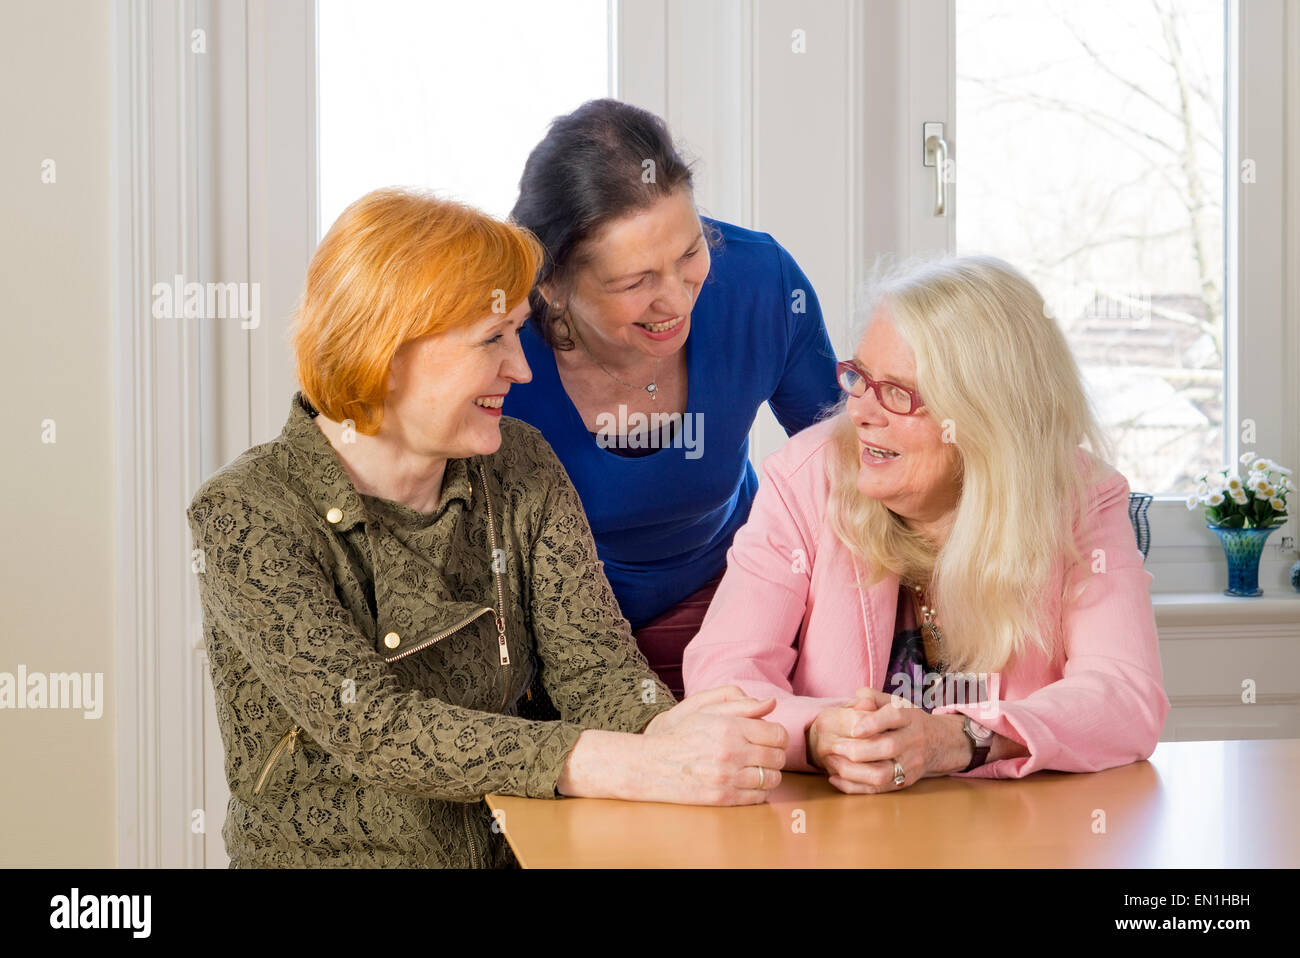 Close up Three Happy Middle Age Women Friends Enjoying their Girl Talk at the Wooden Dining Table Inside a Restaurant. Stock Photo